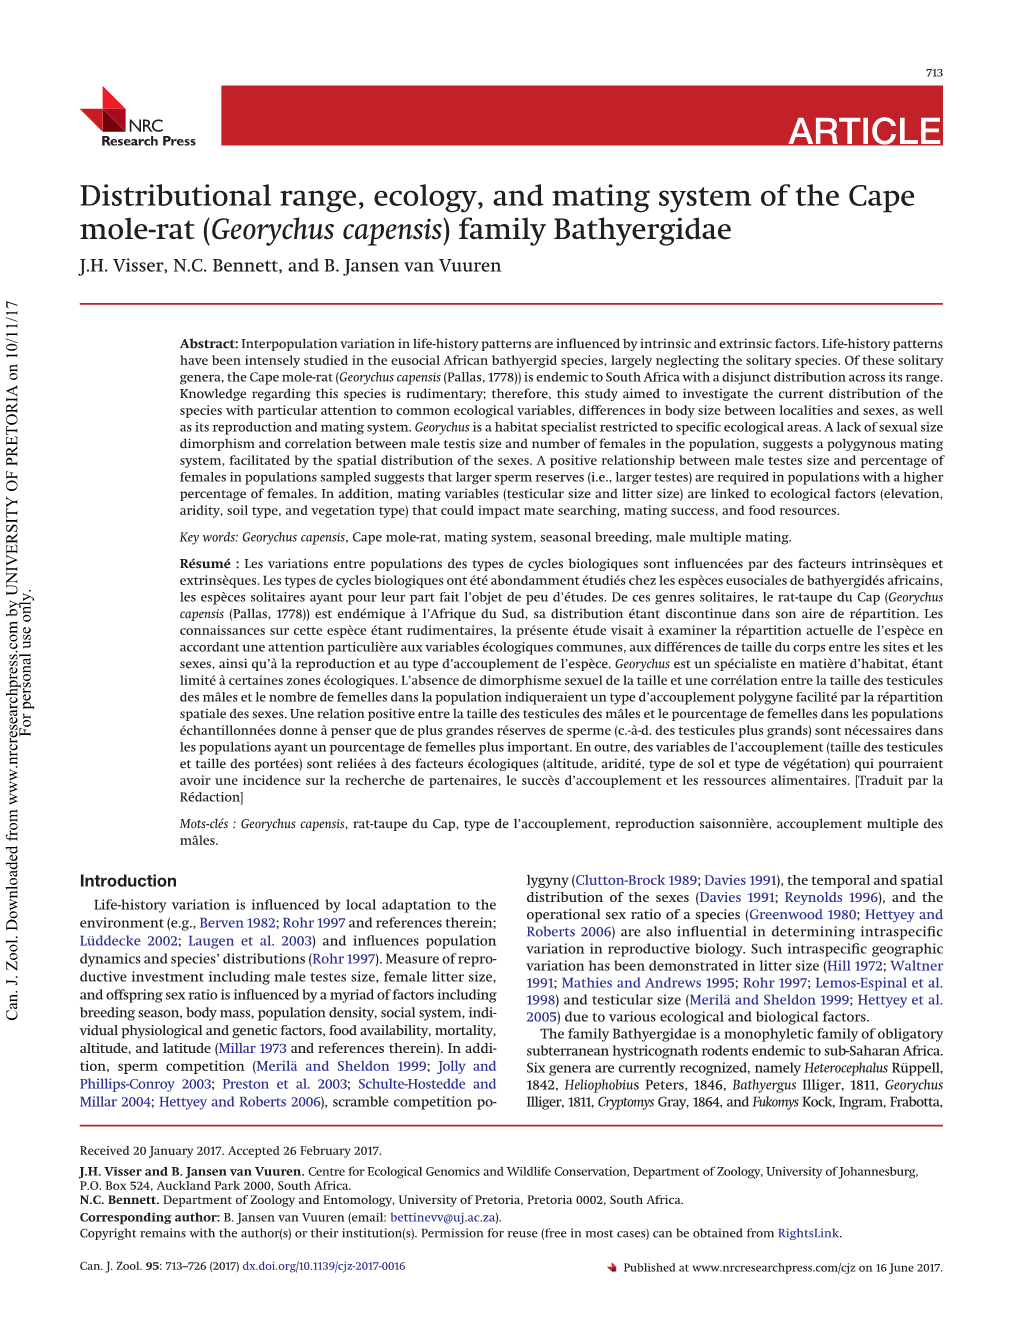 Distributional Range, Ecology, and Mating System of the Cape Mole-Rat (Georychus Capensis) Family Bathyergidae J.H